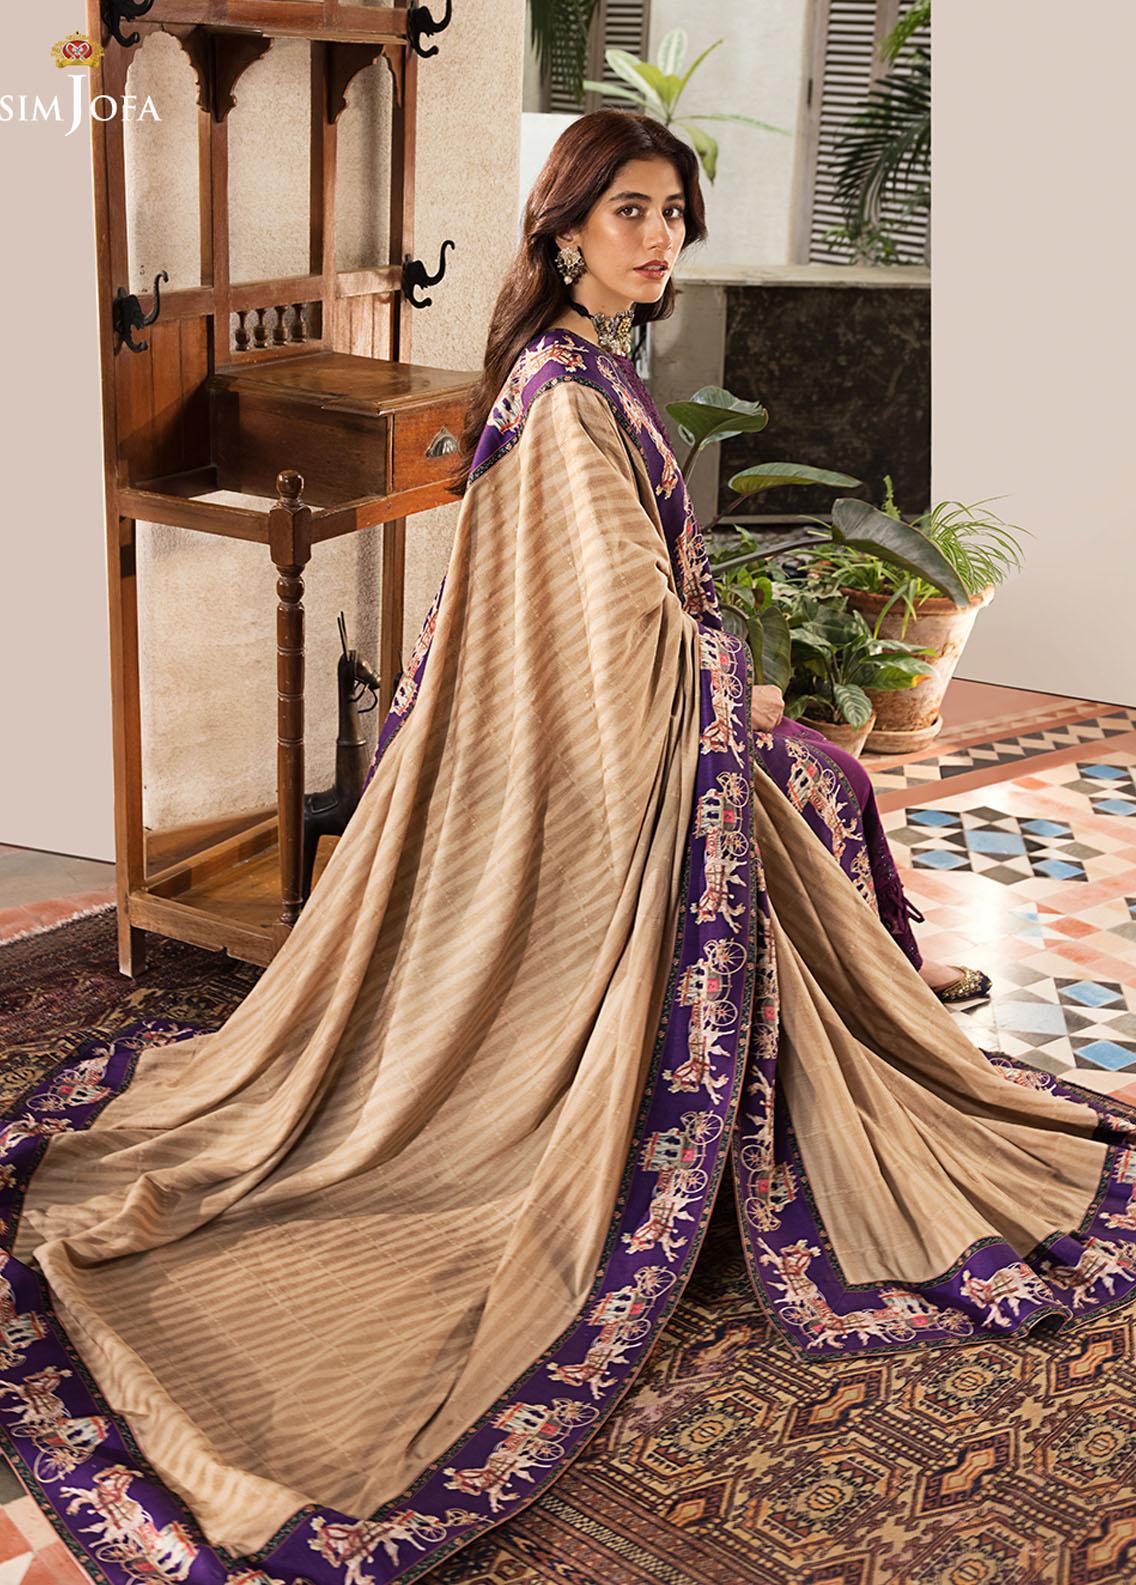 Asim jofa - Embroidered Festive Collection - AJK-02